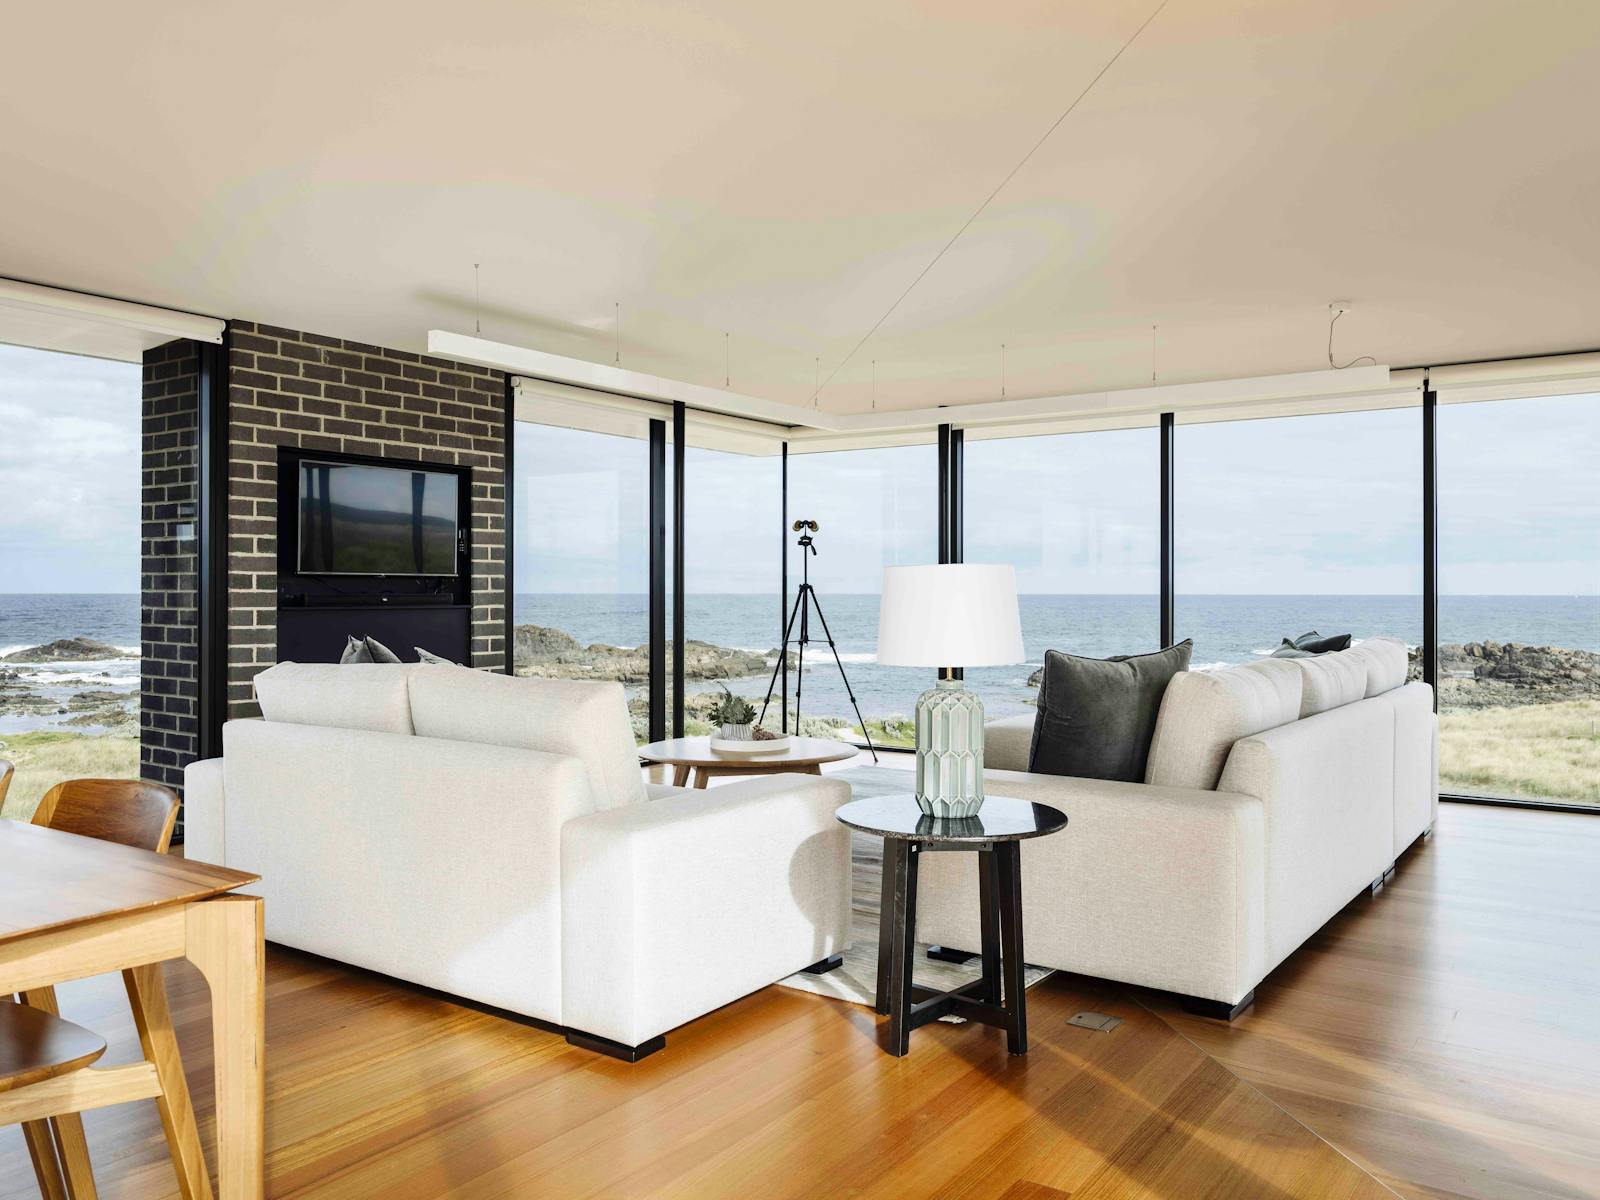 Spacious and comfortable living with bespoke furniture to relax in whilst enjoying the ocean views.